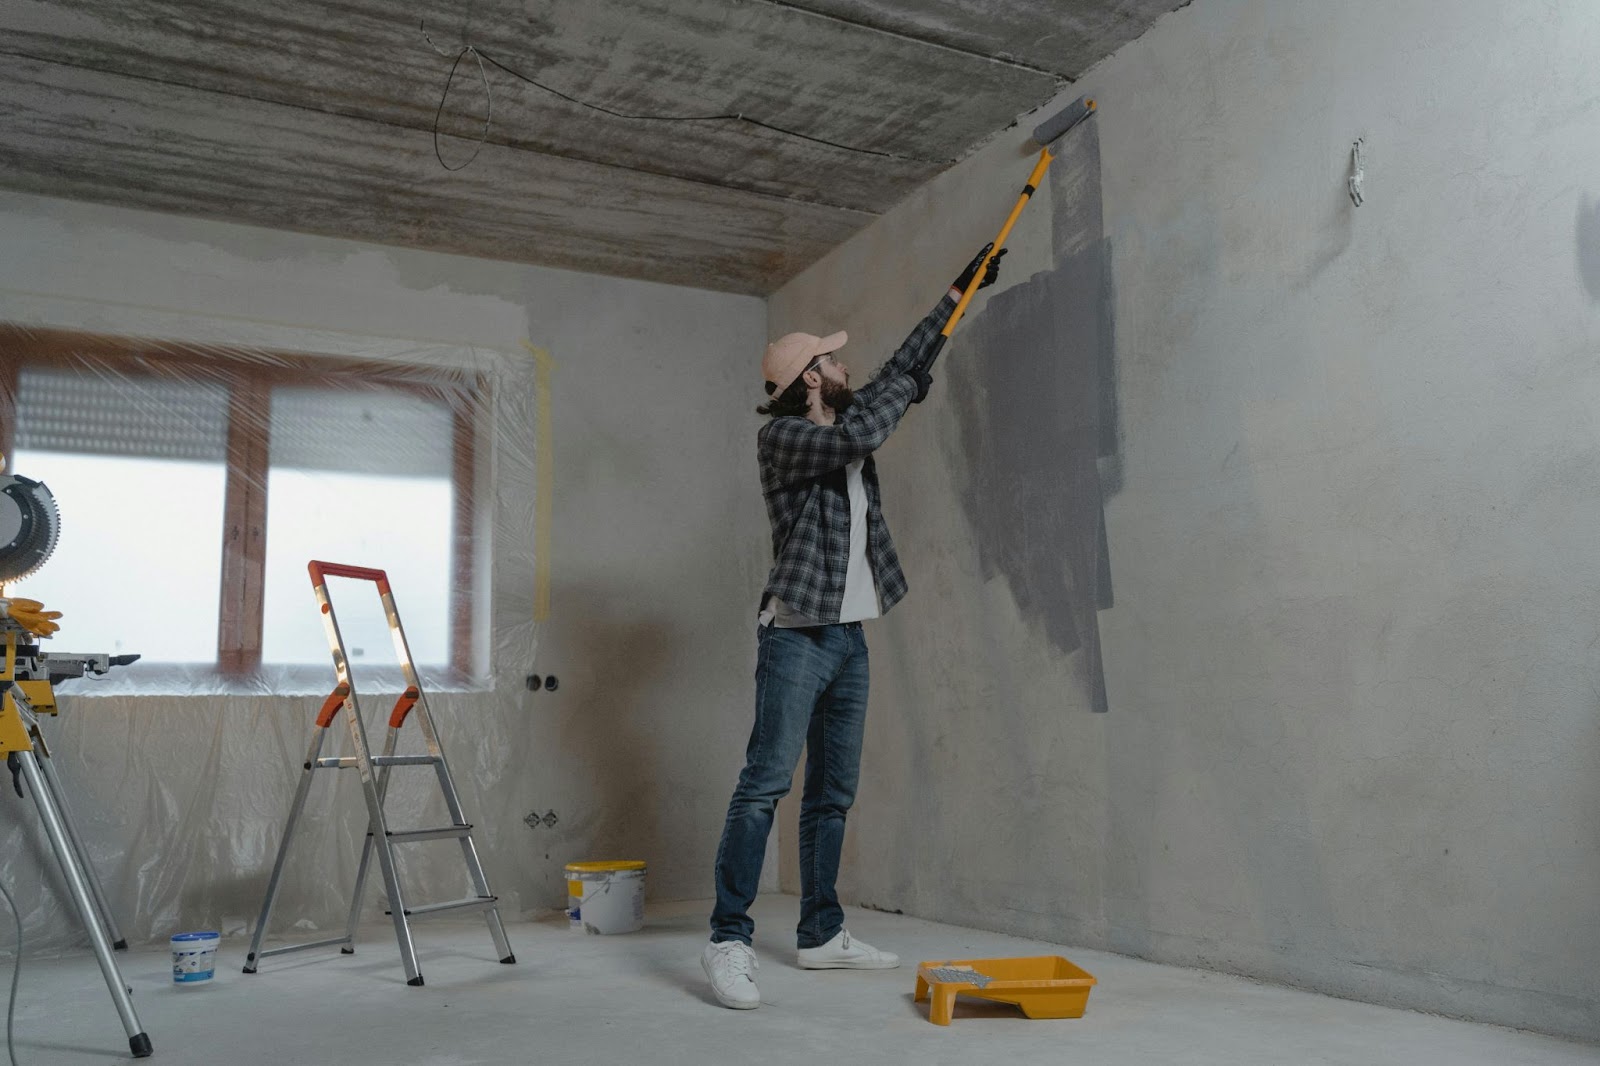 A guy paints over a wall as part of a home renovation project